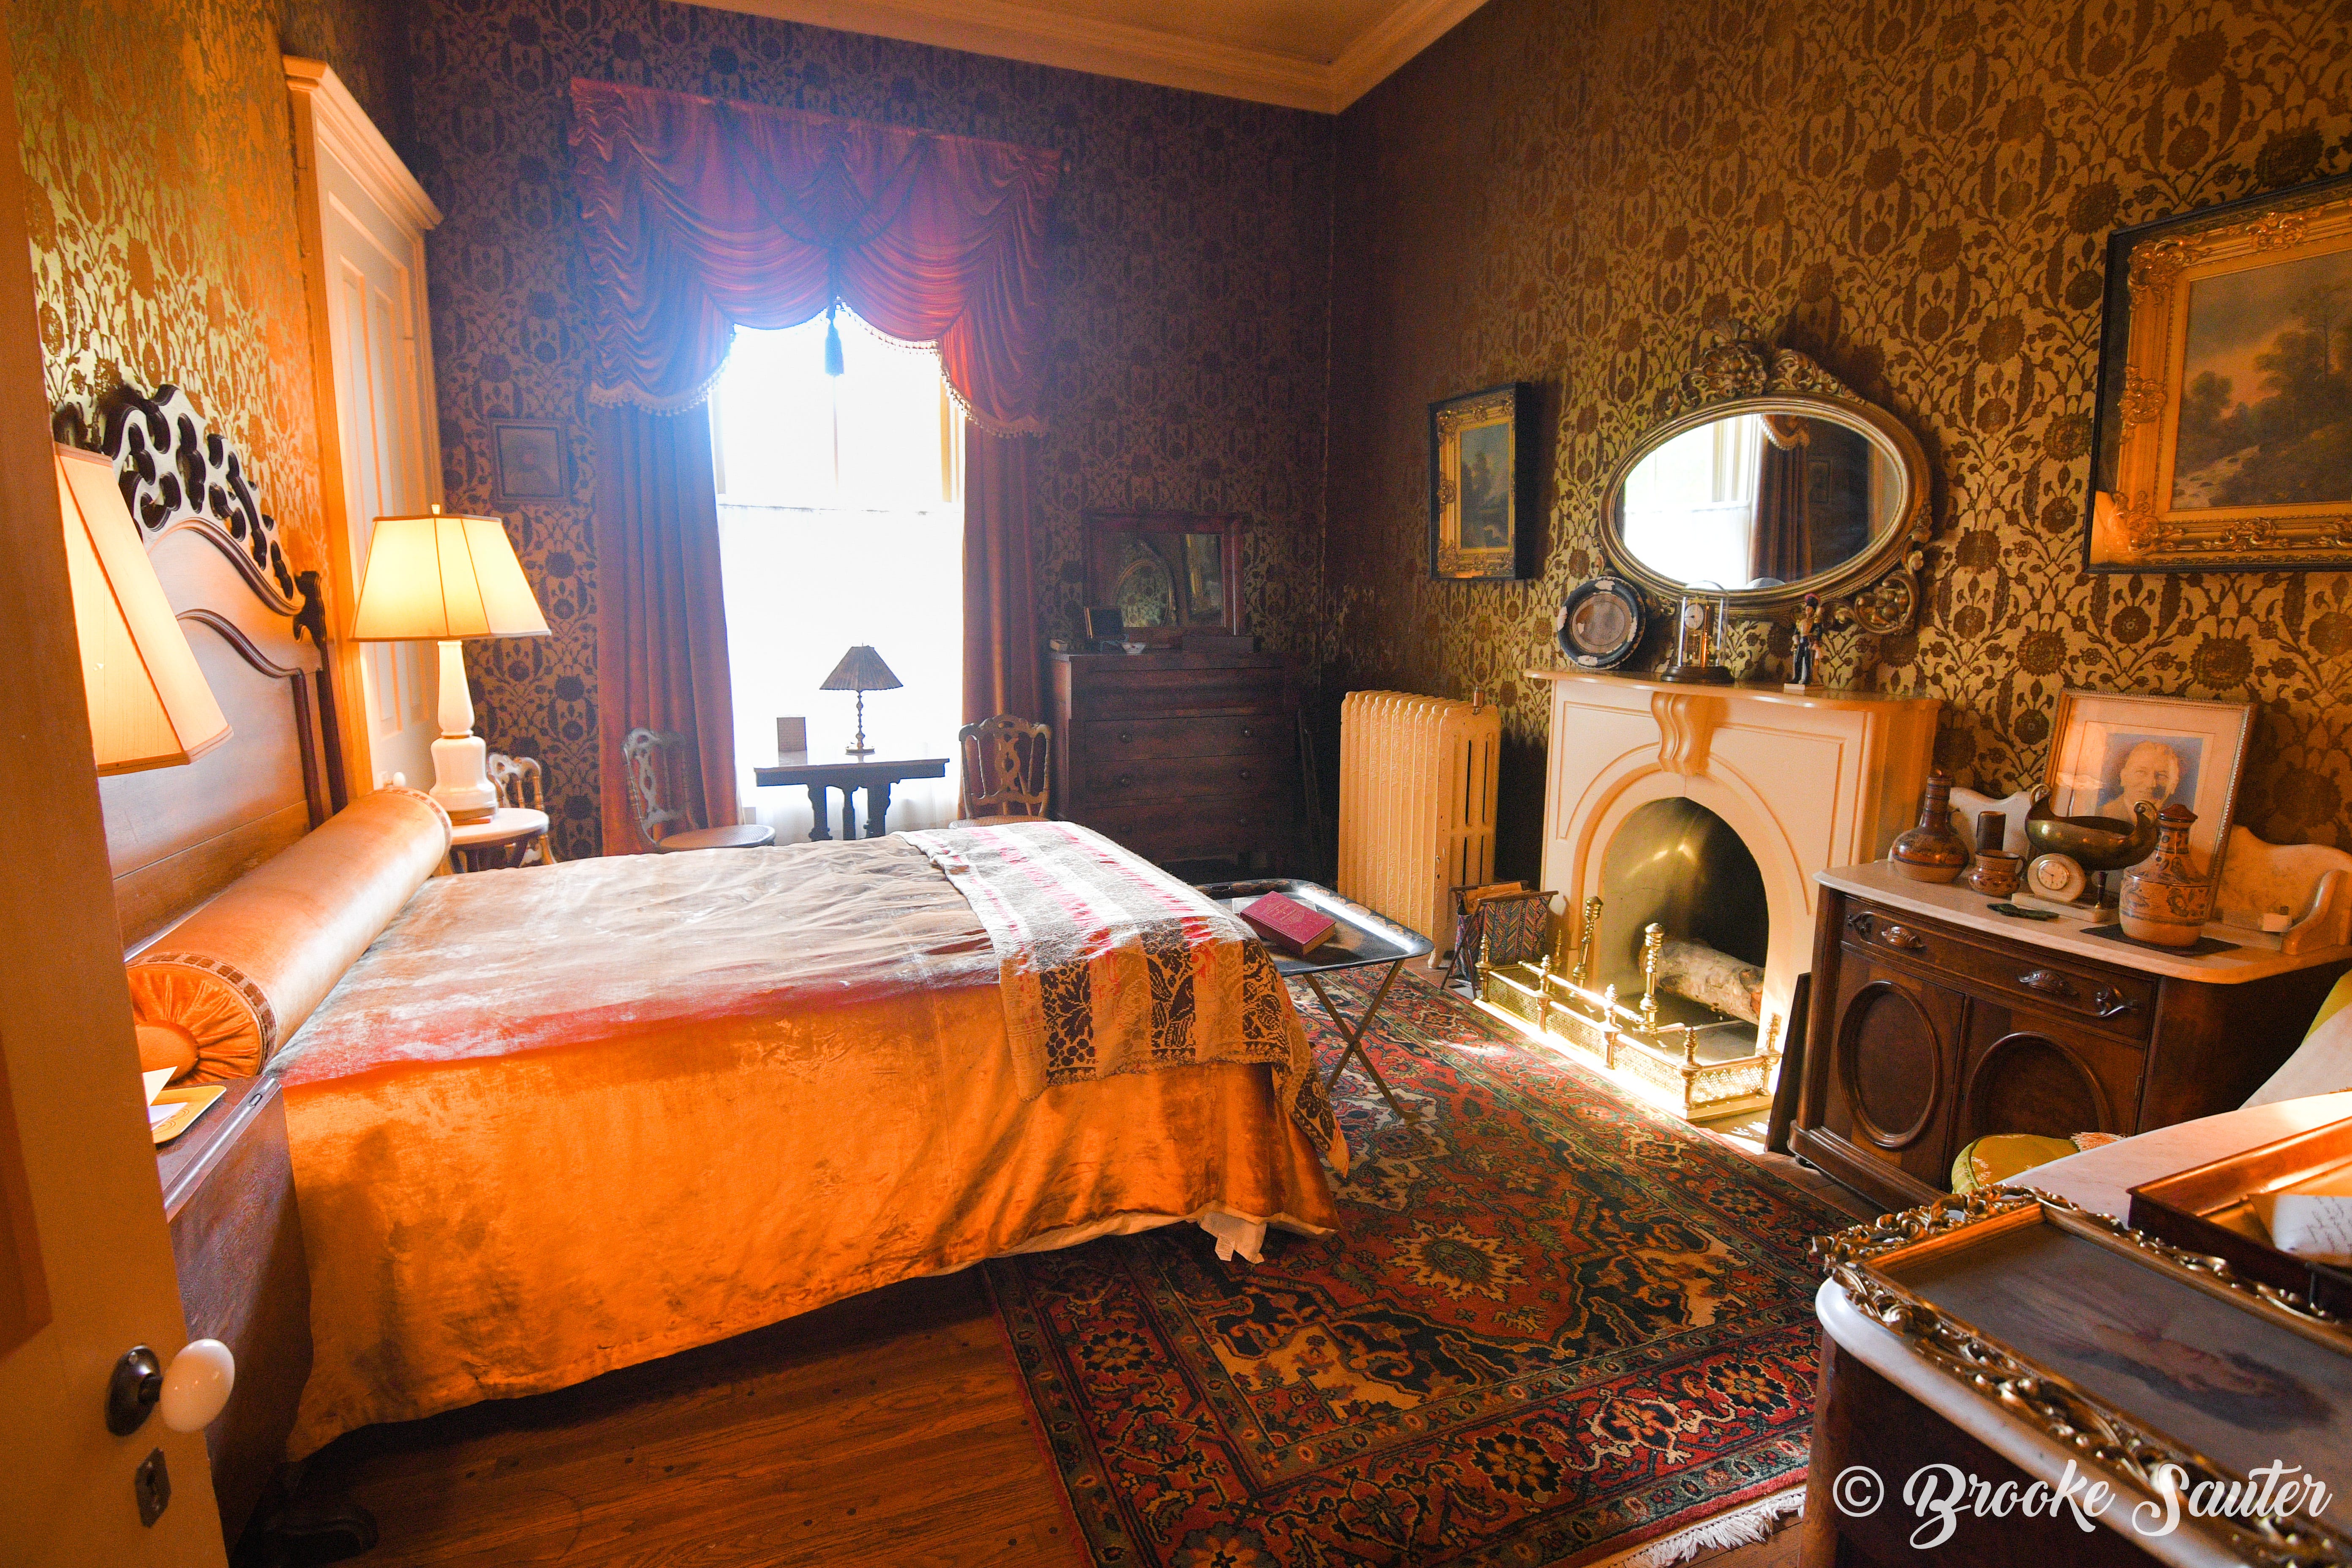 A look inside the historic Ball home on Ninth Street Hill